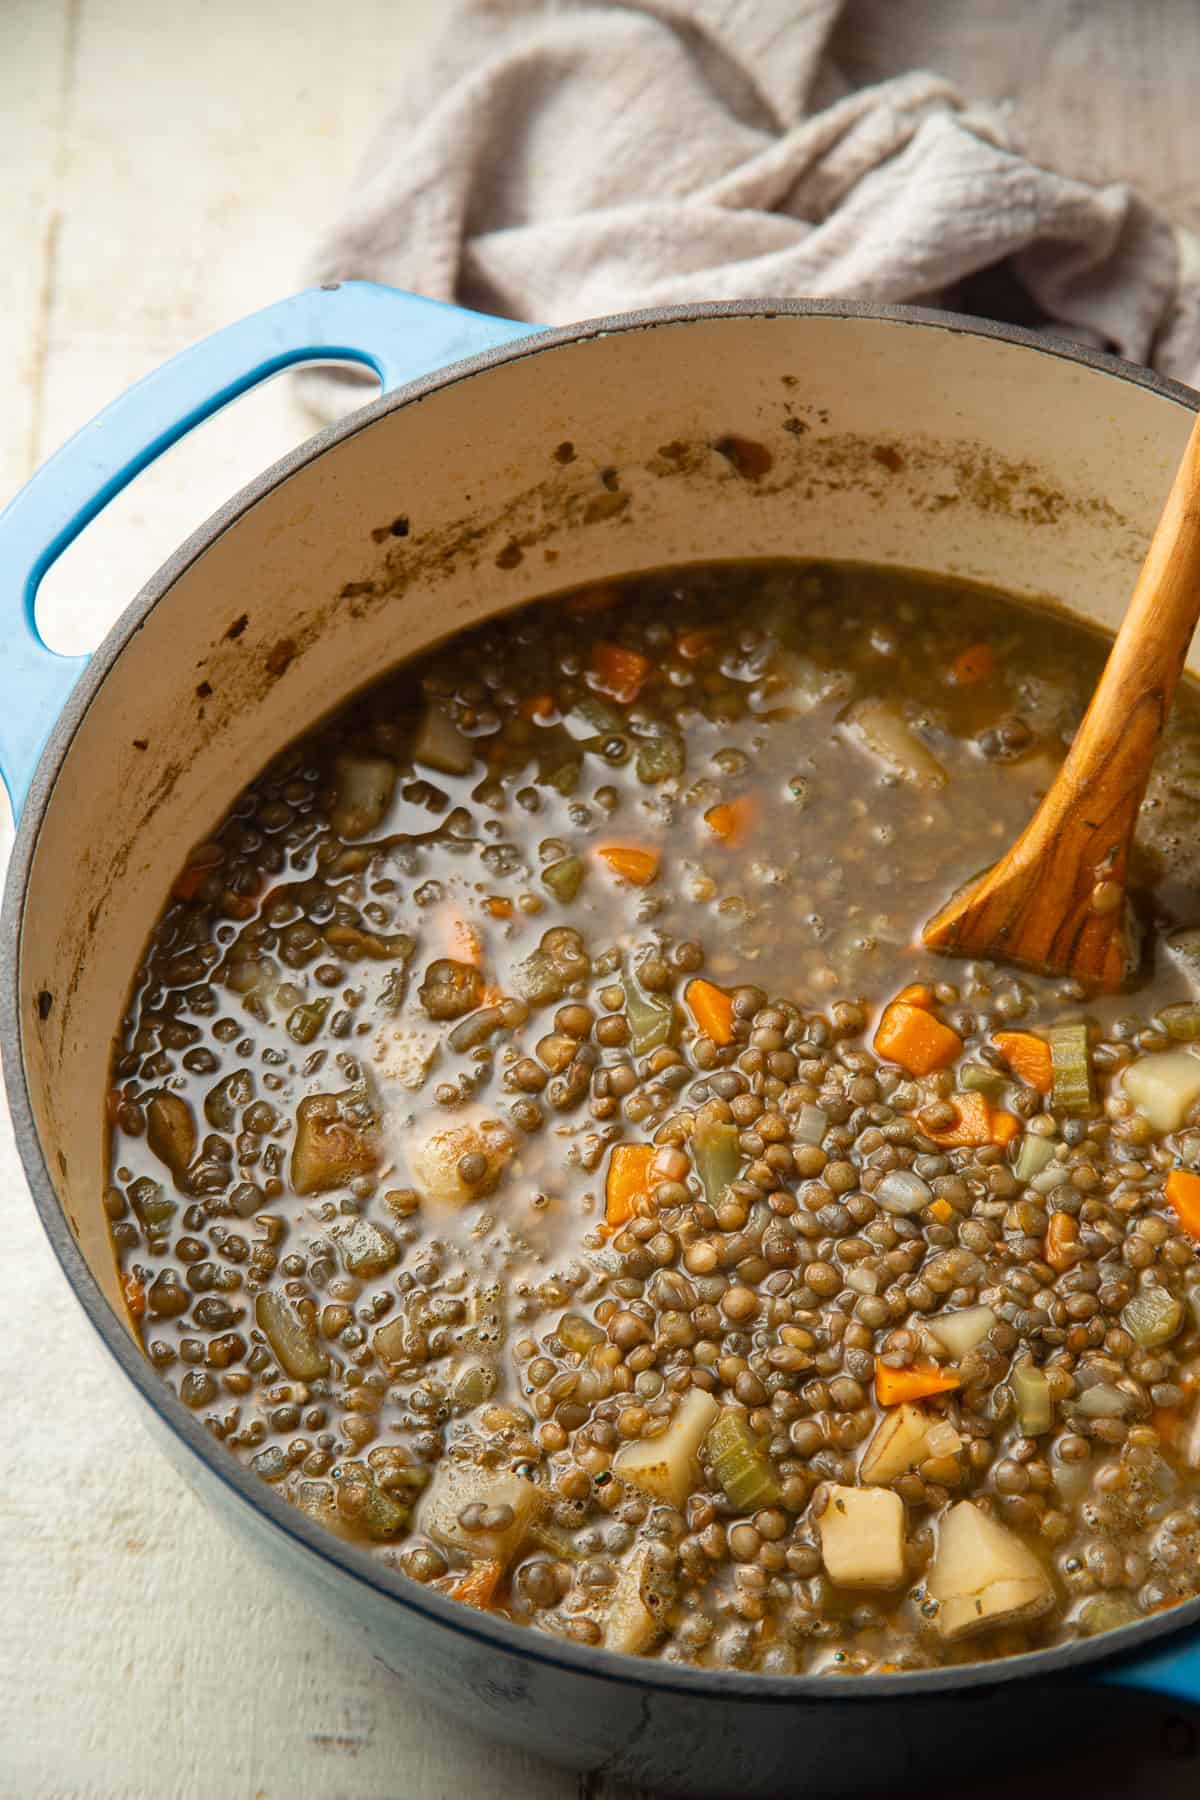 Pot of French Lentil Soup with a wooden spoon.